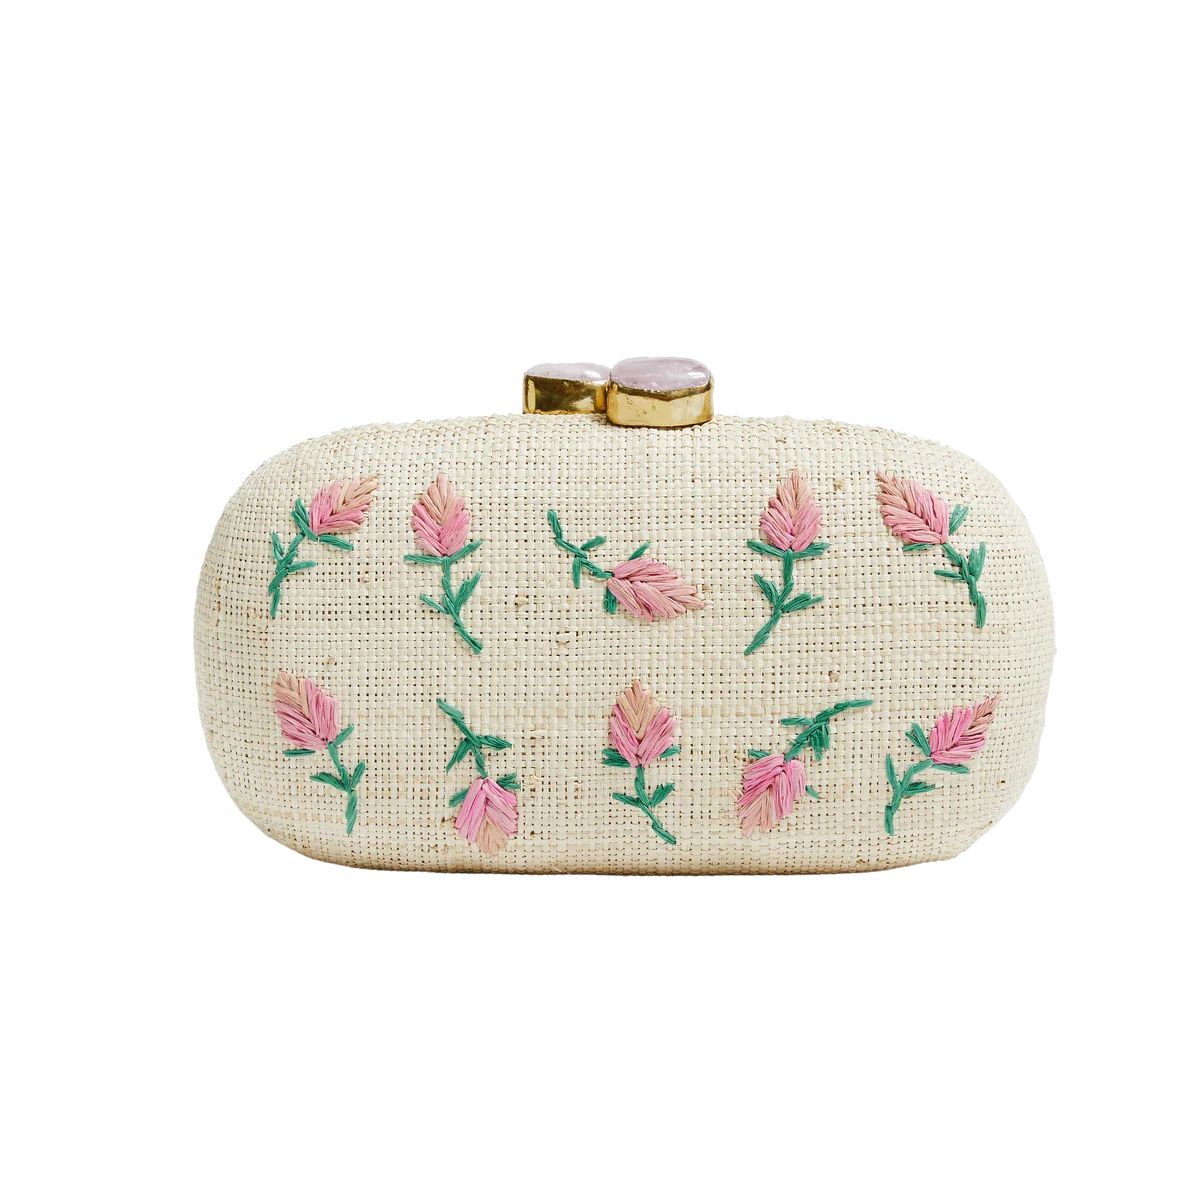 Rosebud Clutch | Over The Moon